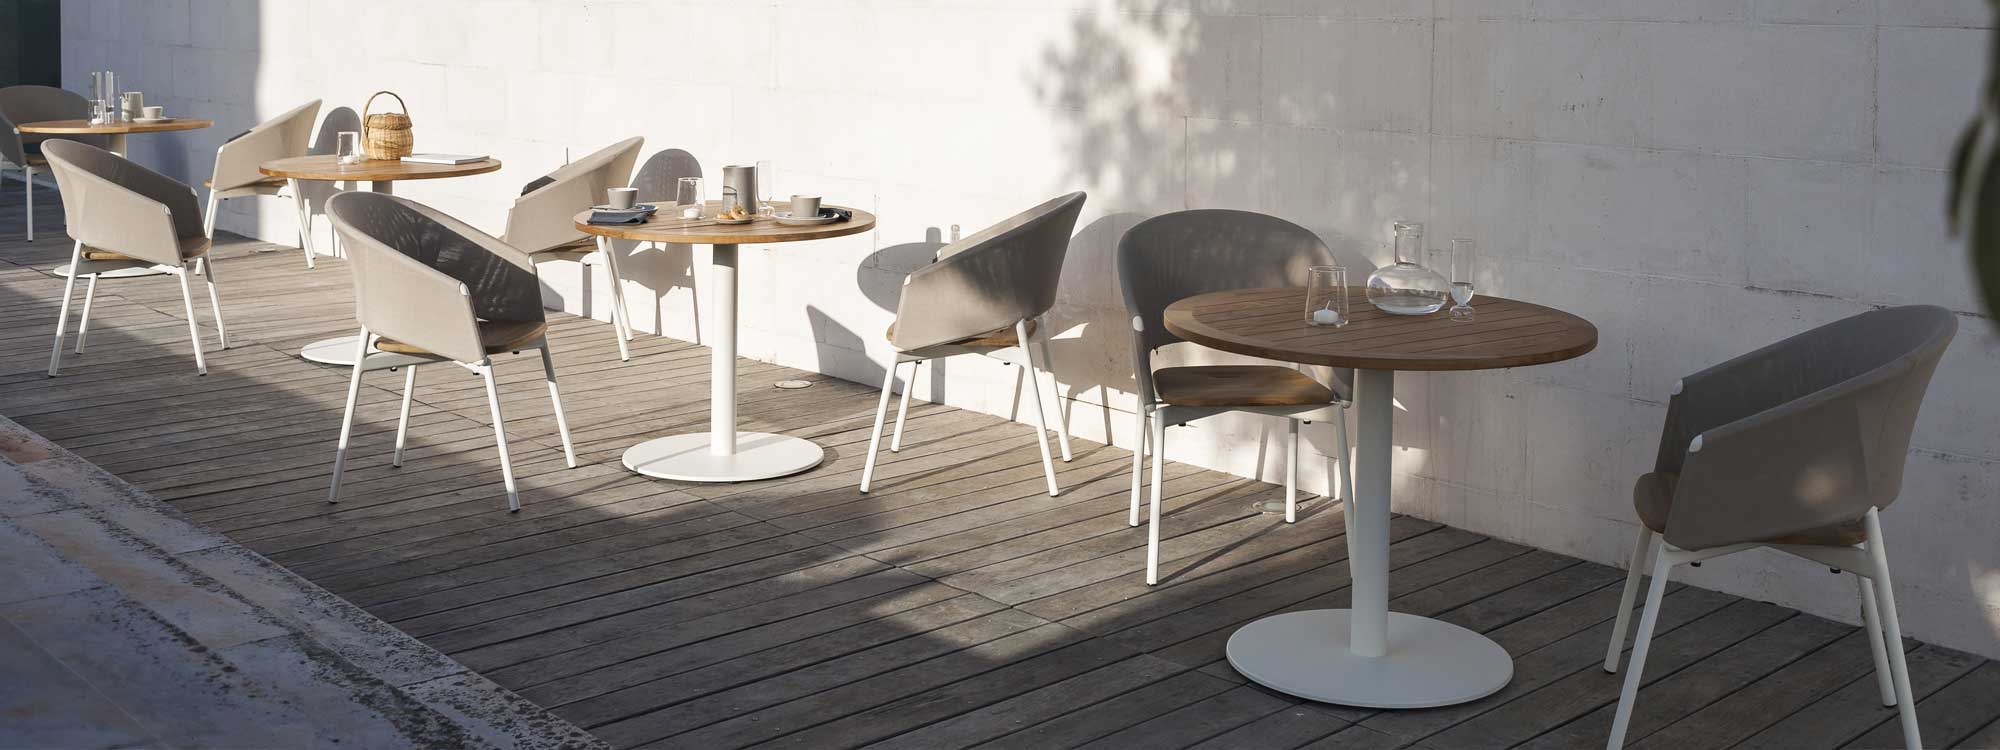 Piper Comfort garden chairs & Stem bistro tables on decked terrace